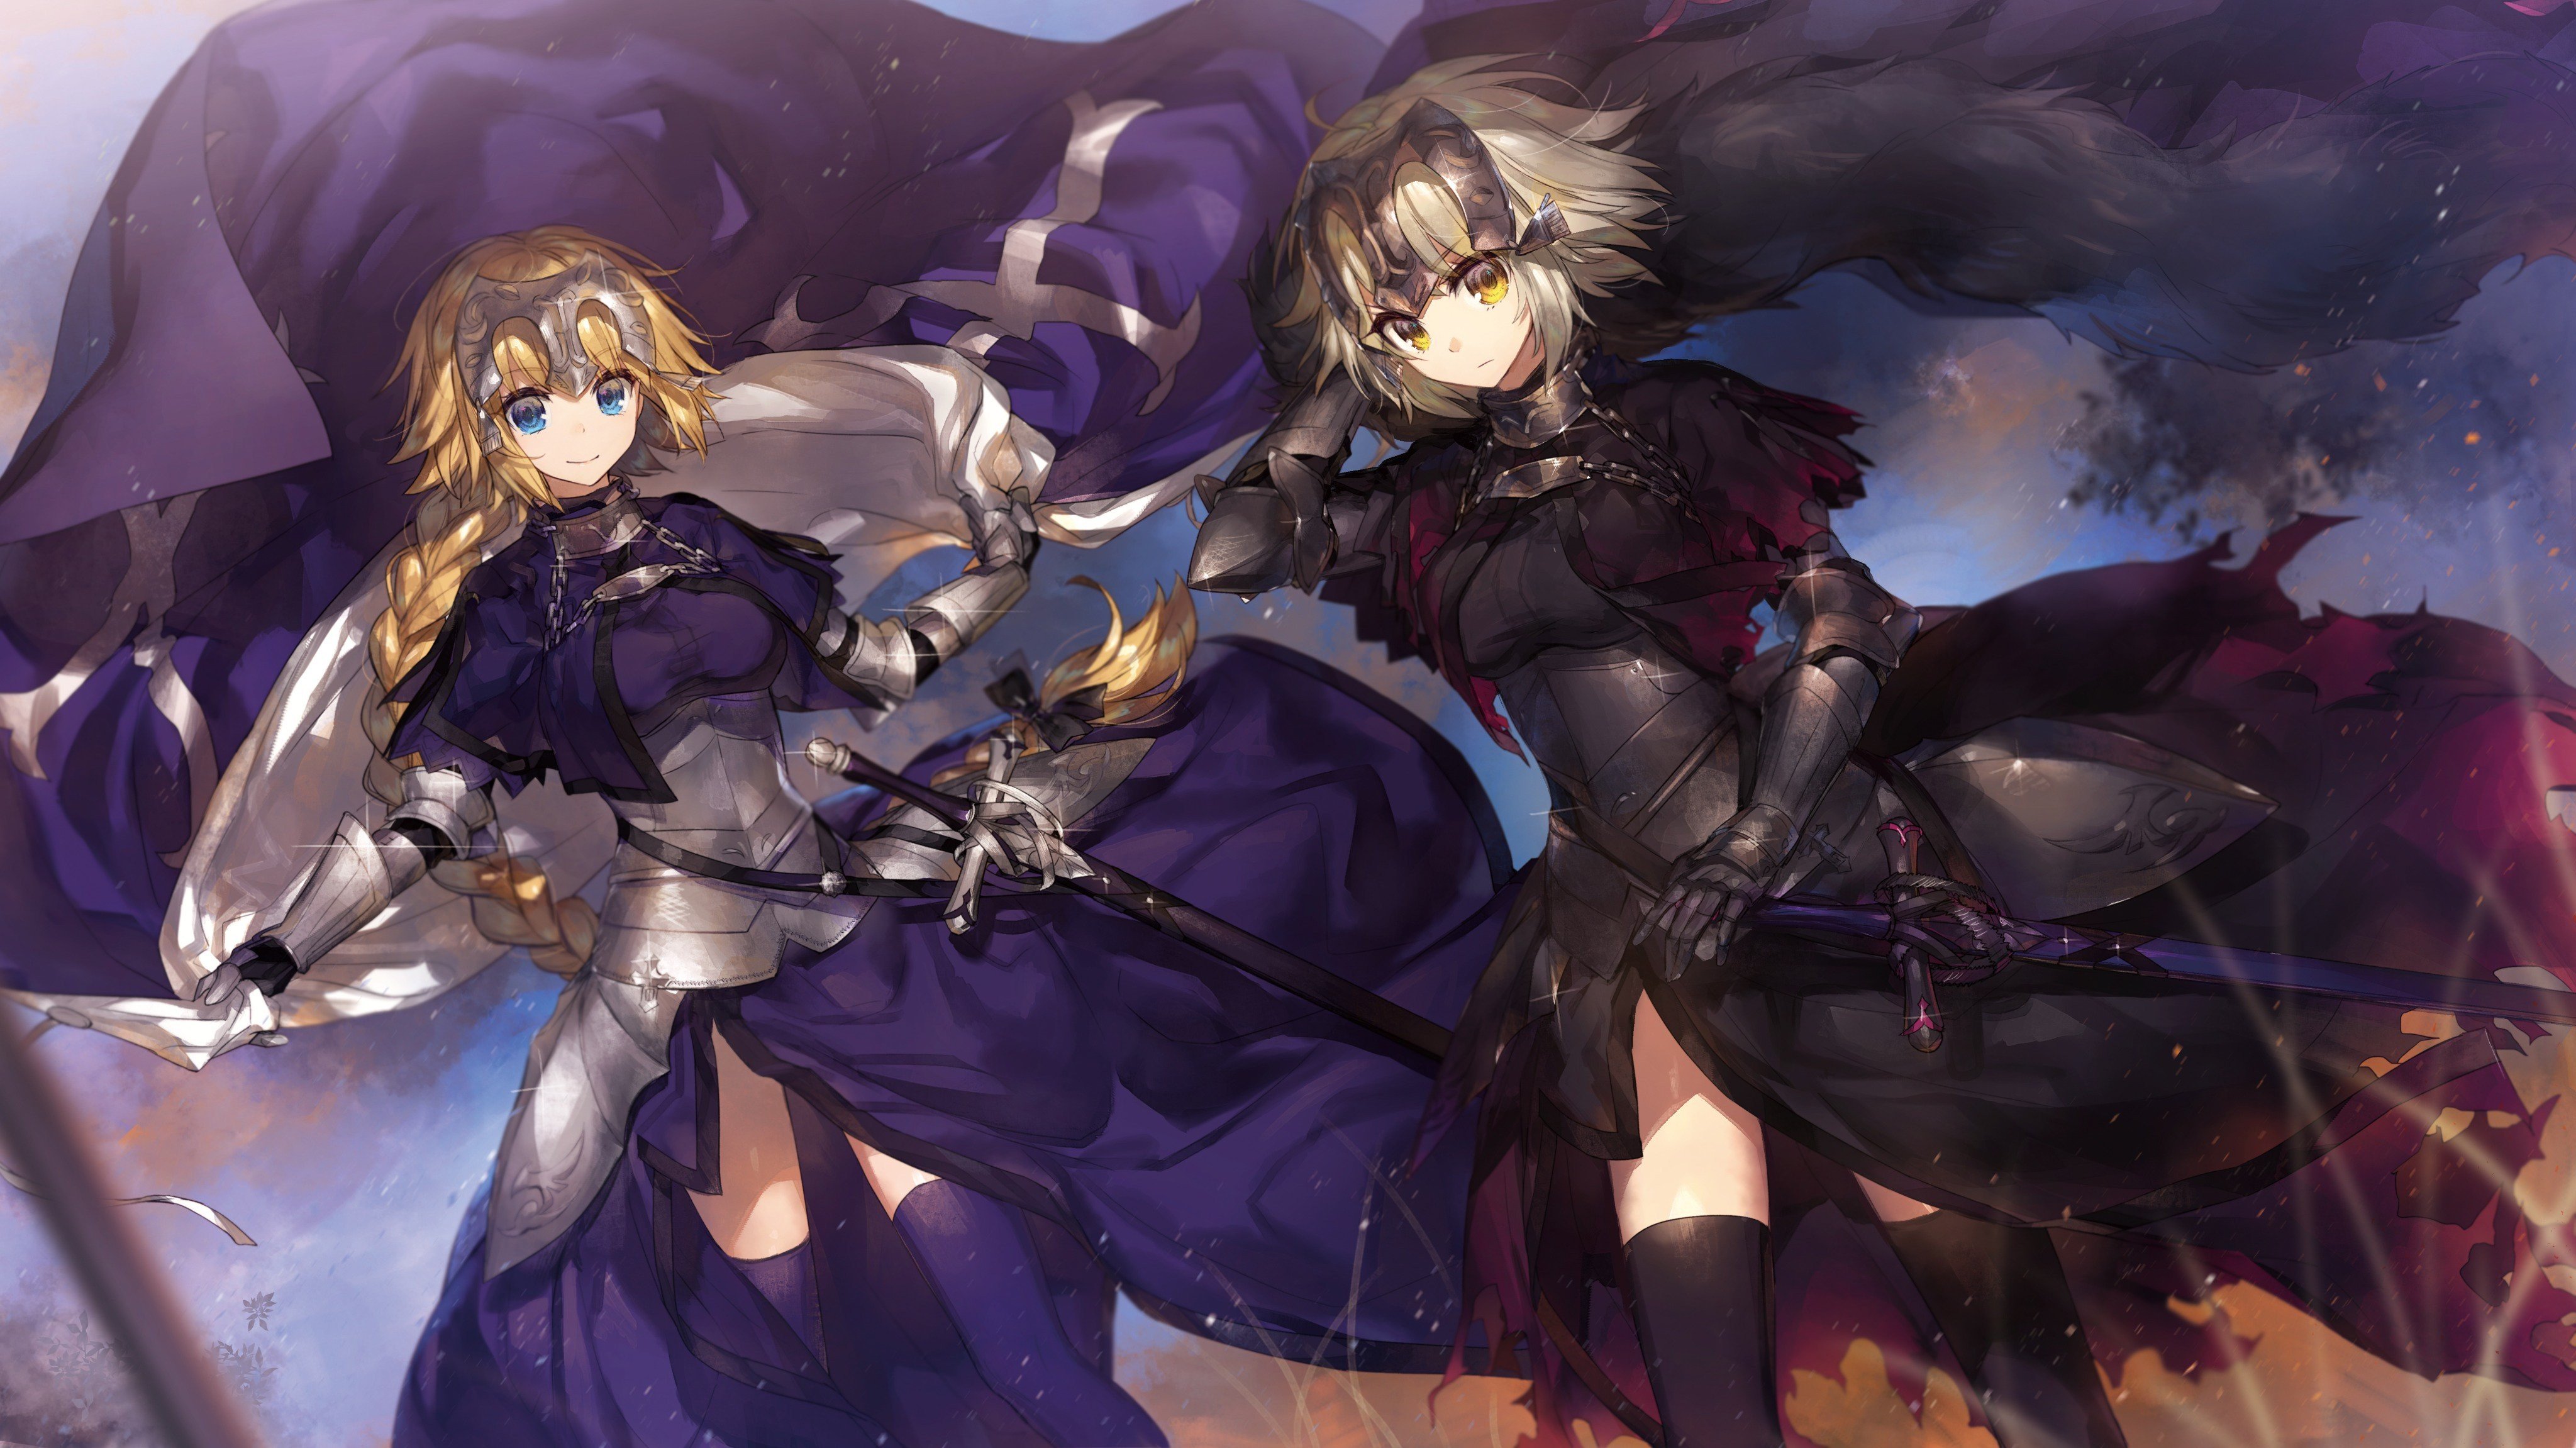 blonde, Armor, Dress, Fate Apocrypha, Fate Grand Order, Fate Stay Night, Jeanne d&039;Arc, Sword, Thigh highs, Violet dress, Red dress, Cloaks Wallpaper